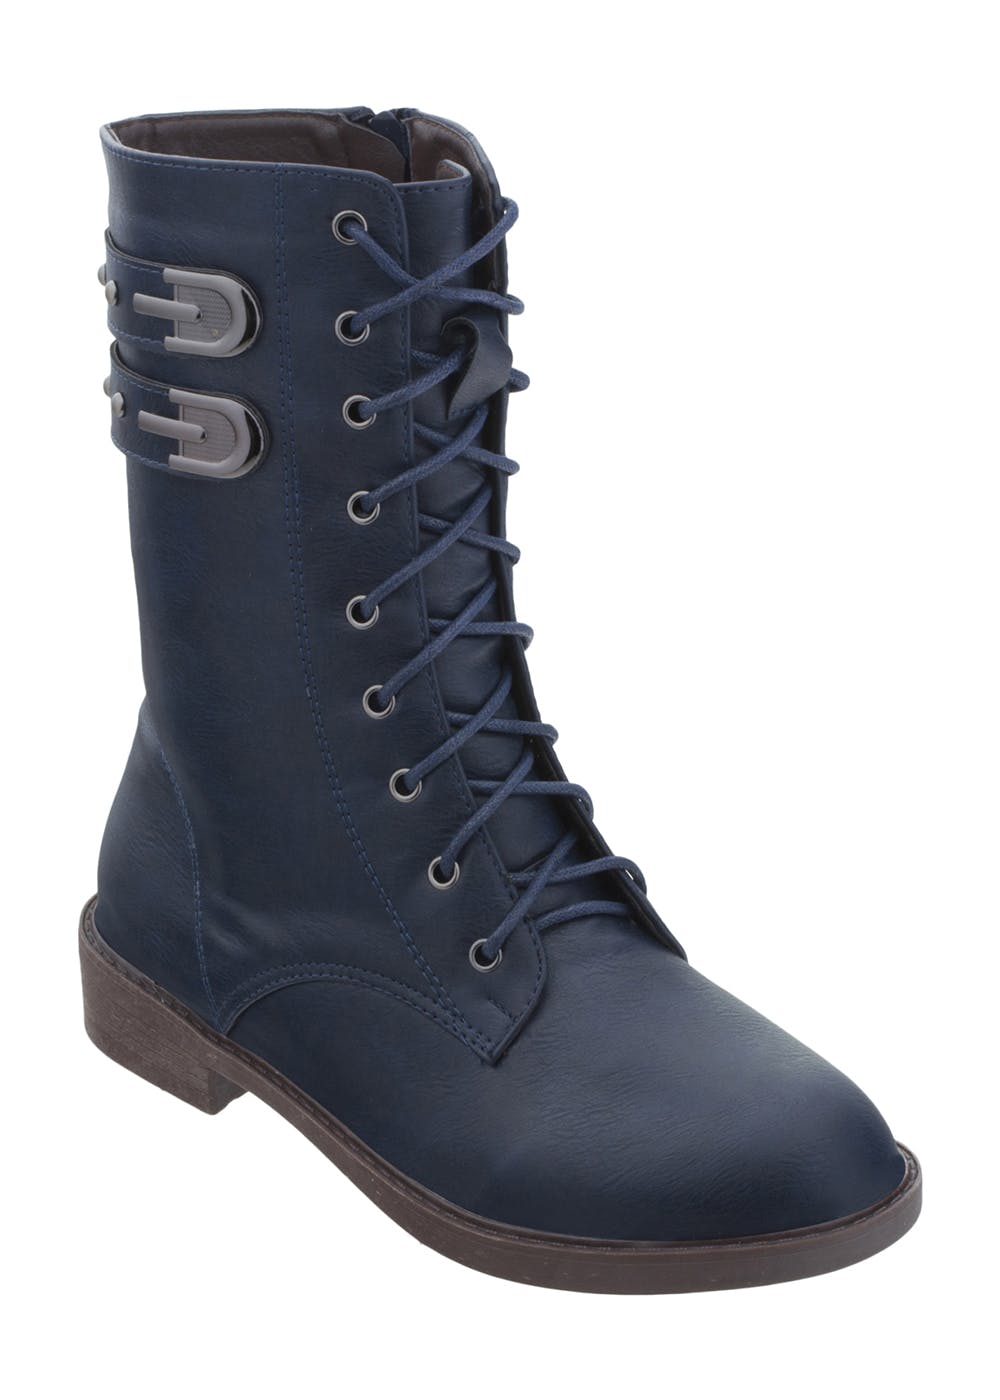 Get Solid Lace-Up High Boots at ₹ 2199 